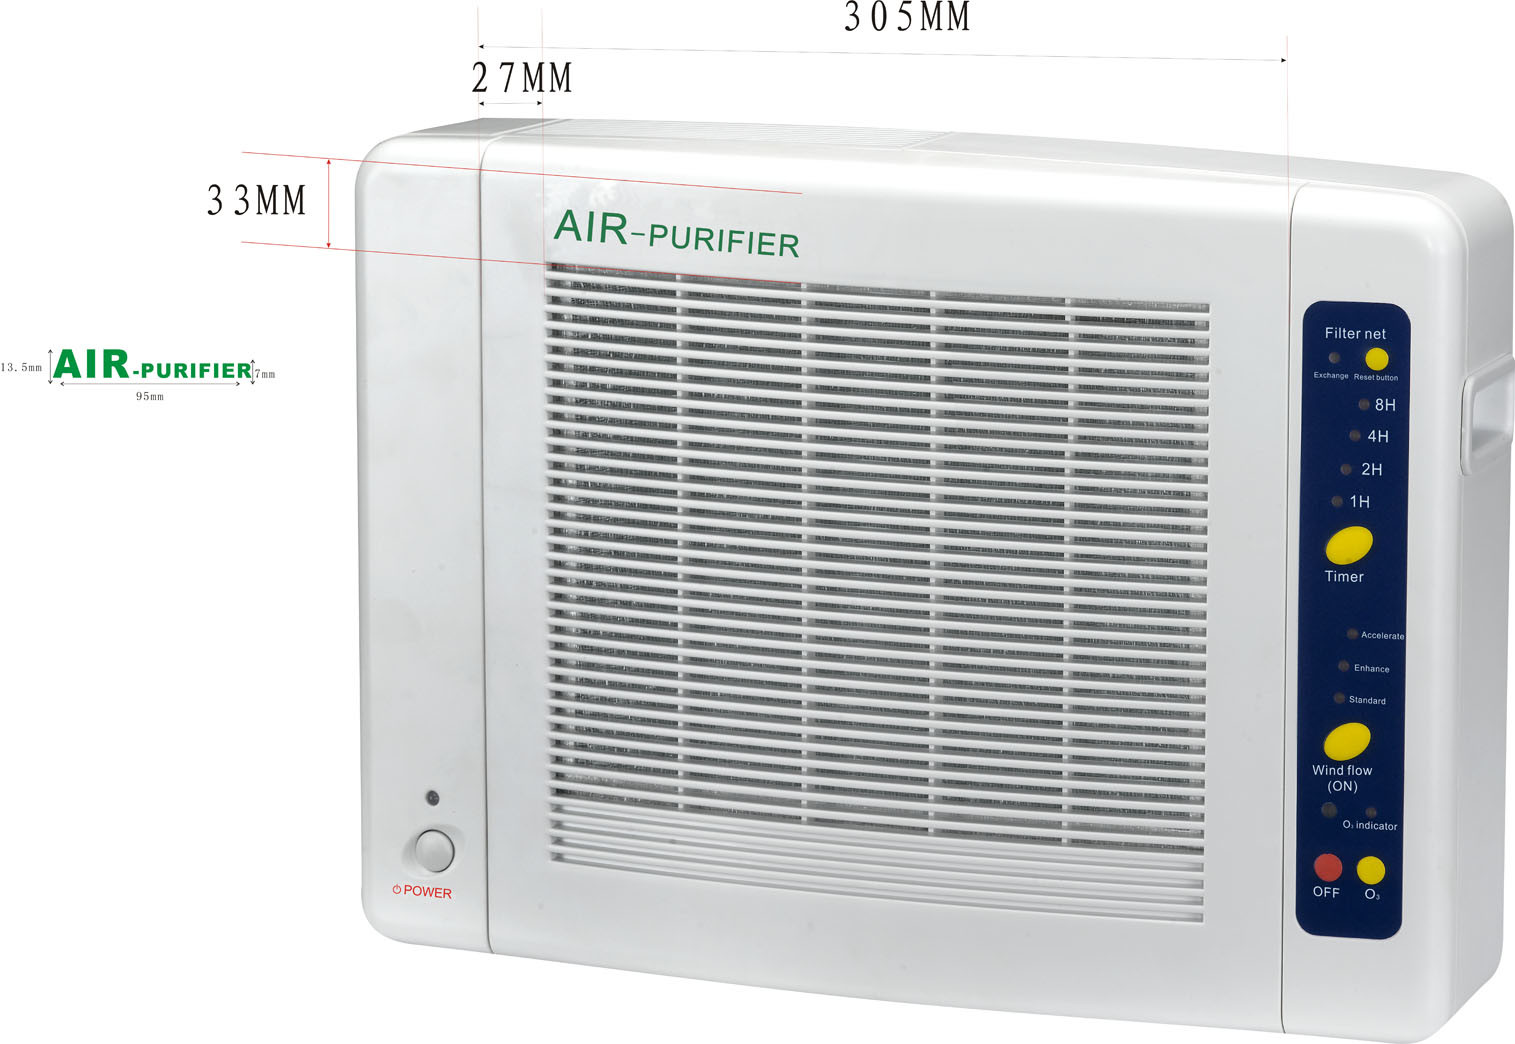 High Effective Air Purifier With Timer and Remote Controller (GL-2108A)